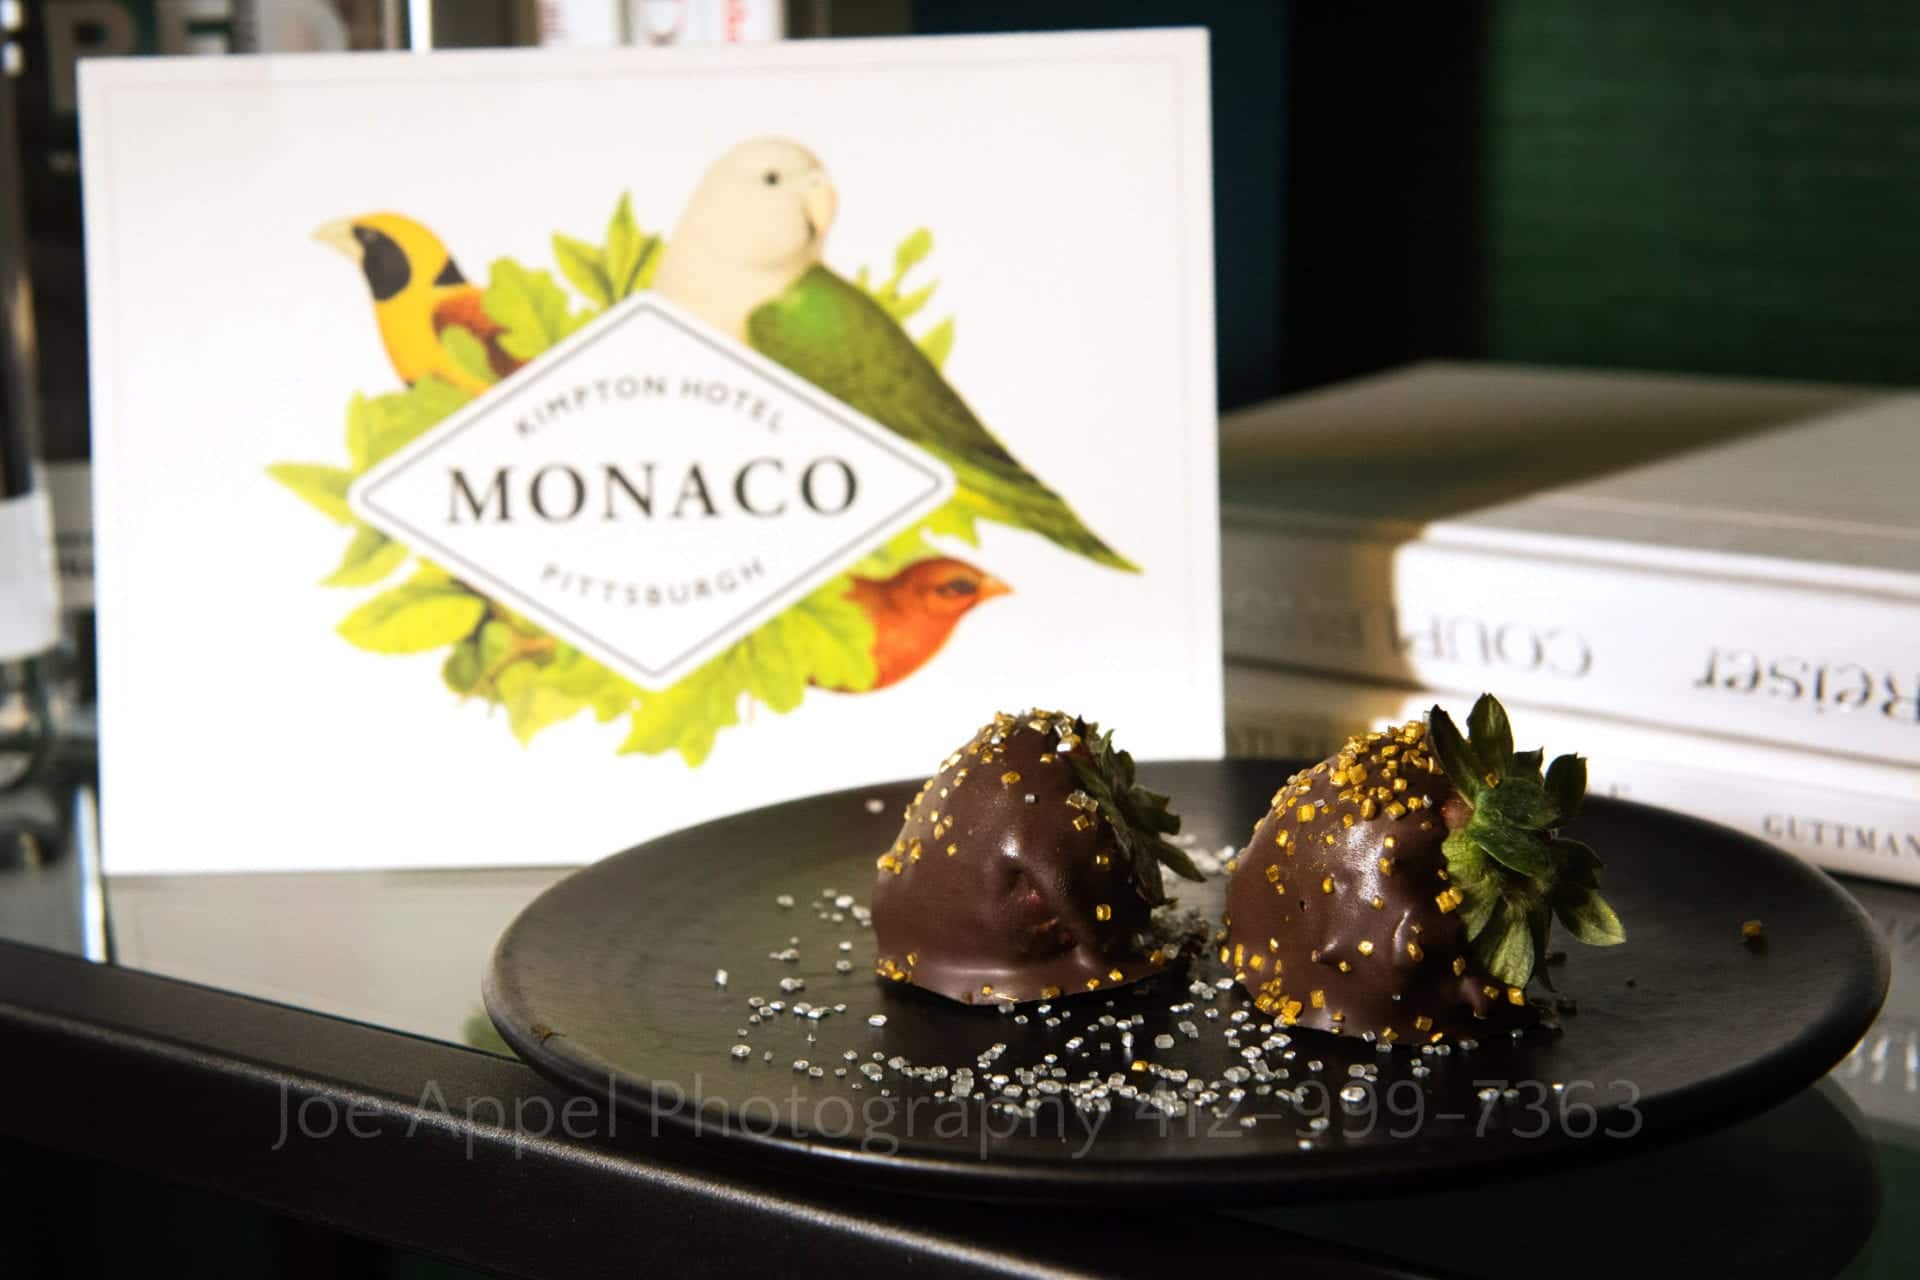 two chocolate covered strawberries with gold sprinkles sit on a black plate in front of a card from the hotel monaco in pittsburgh 